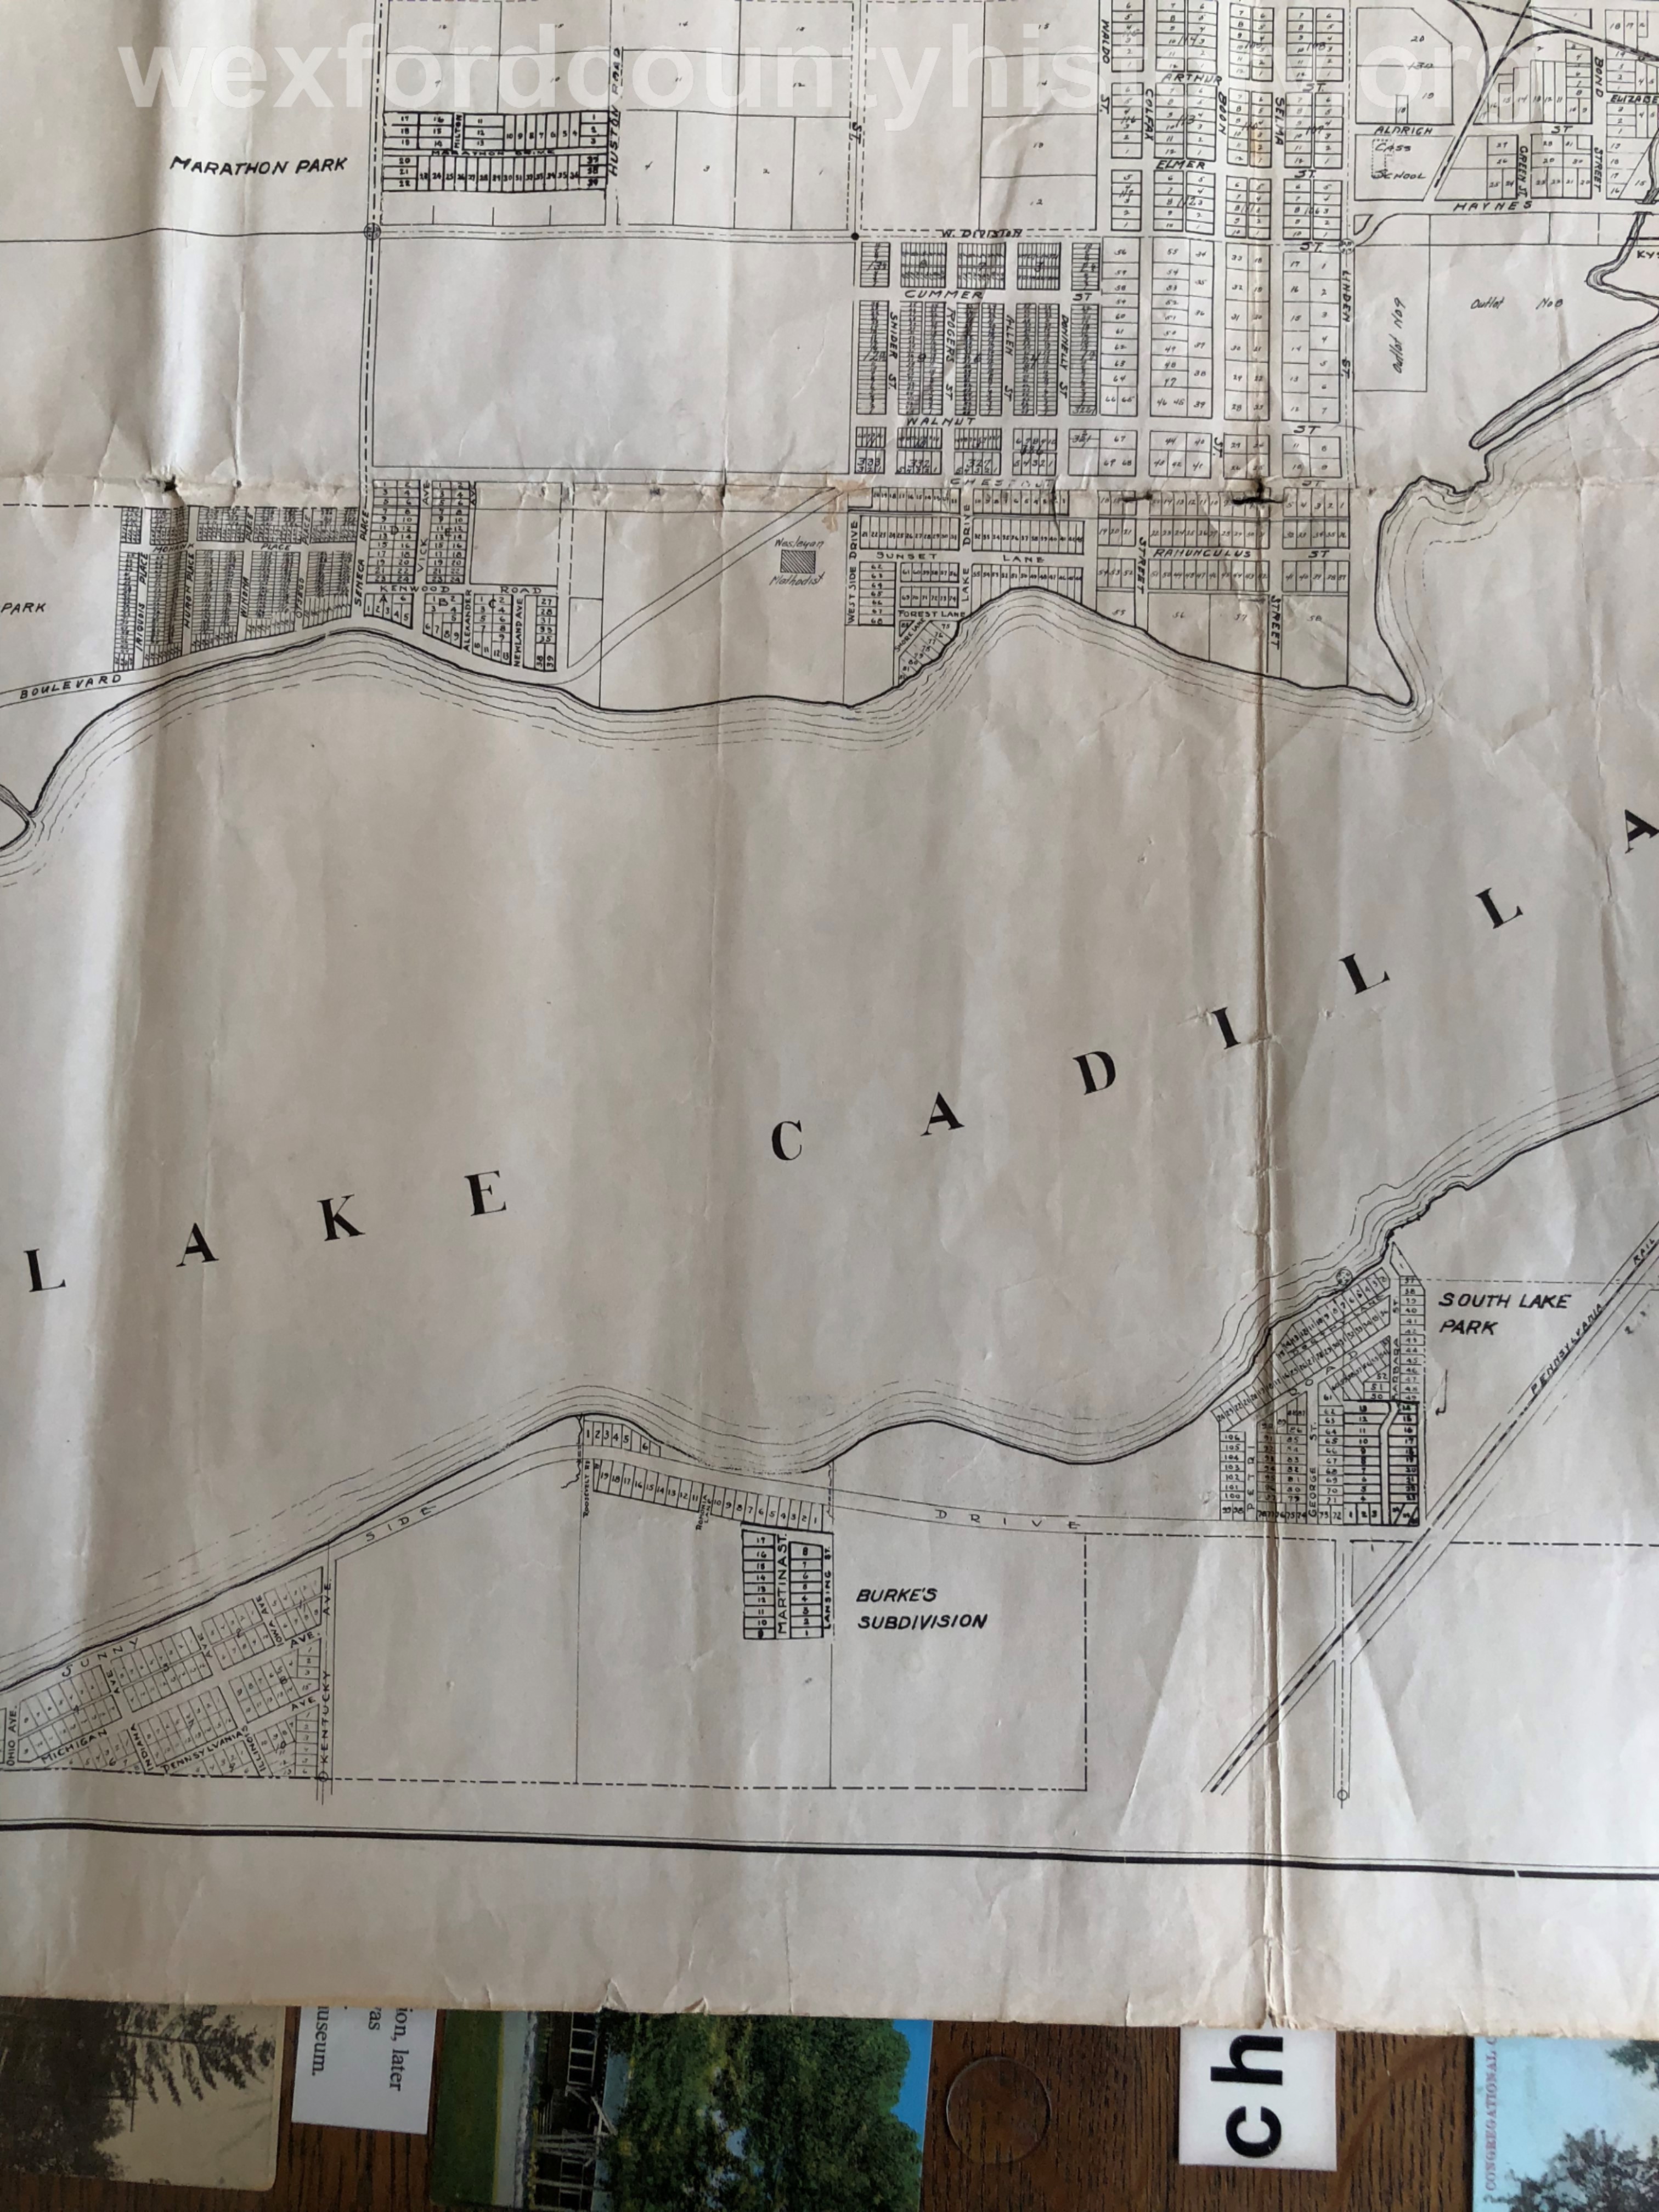 1952 - Revision Plat Map Of The City Of Cadillac